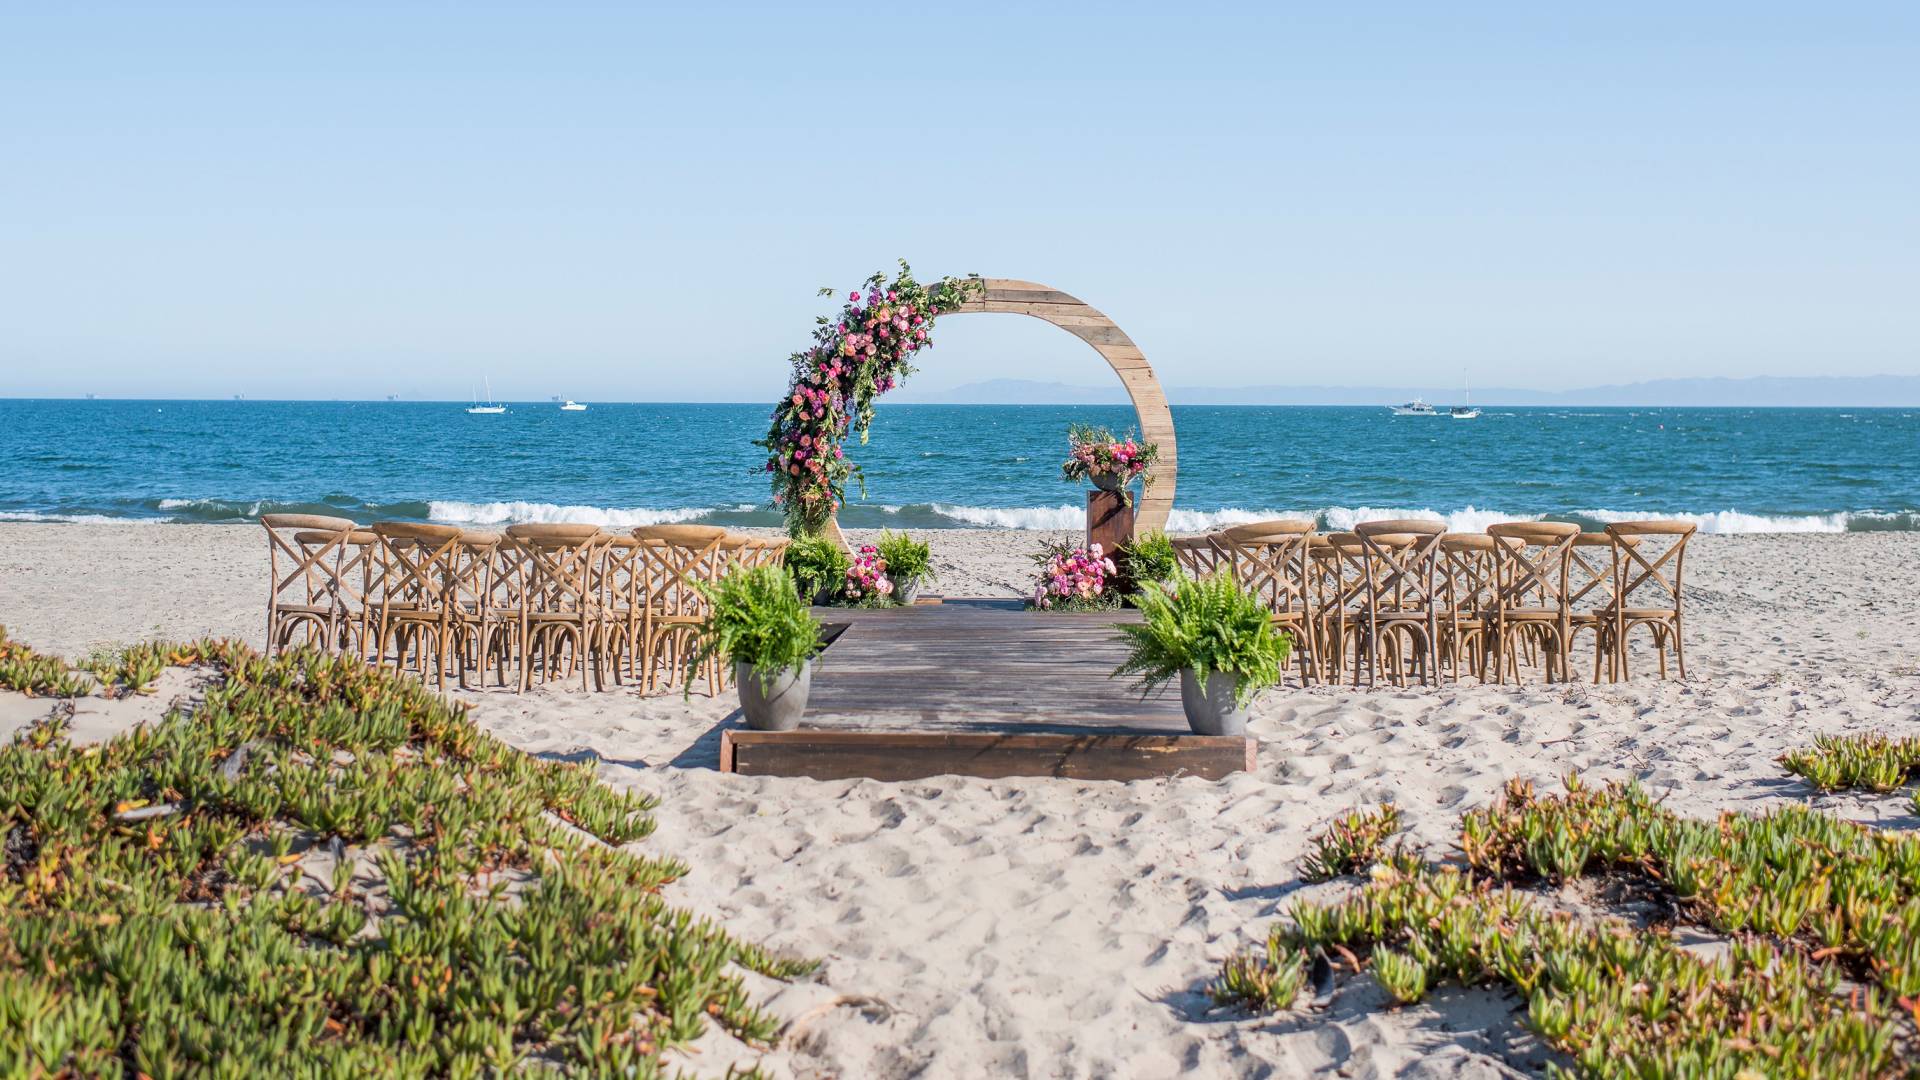 Beach view, with wedding set up featuring chairs and flowers